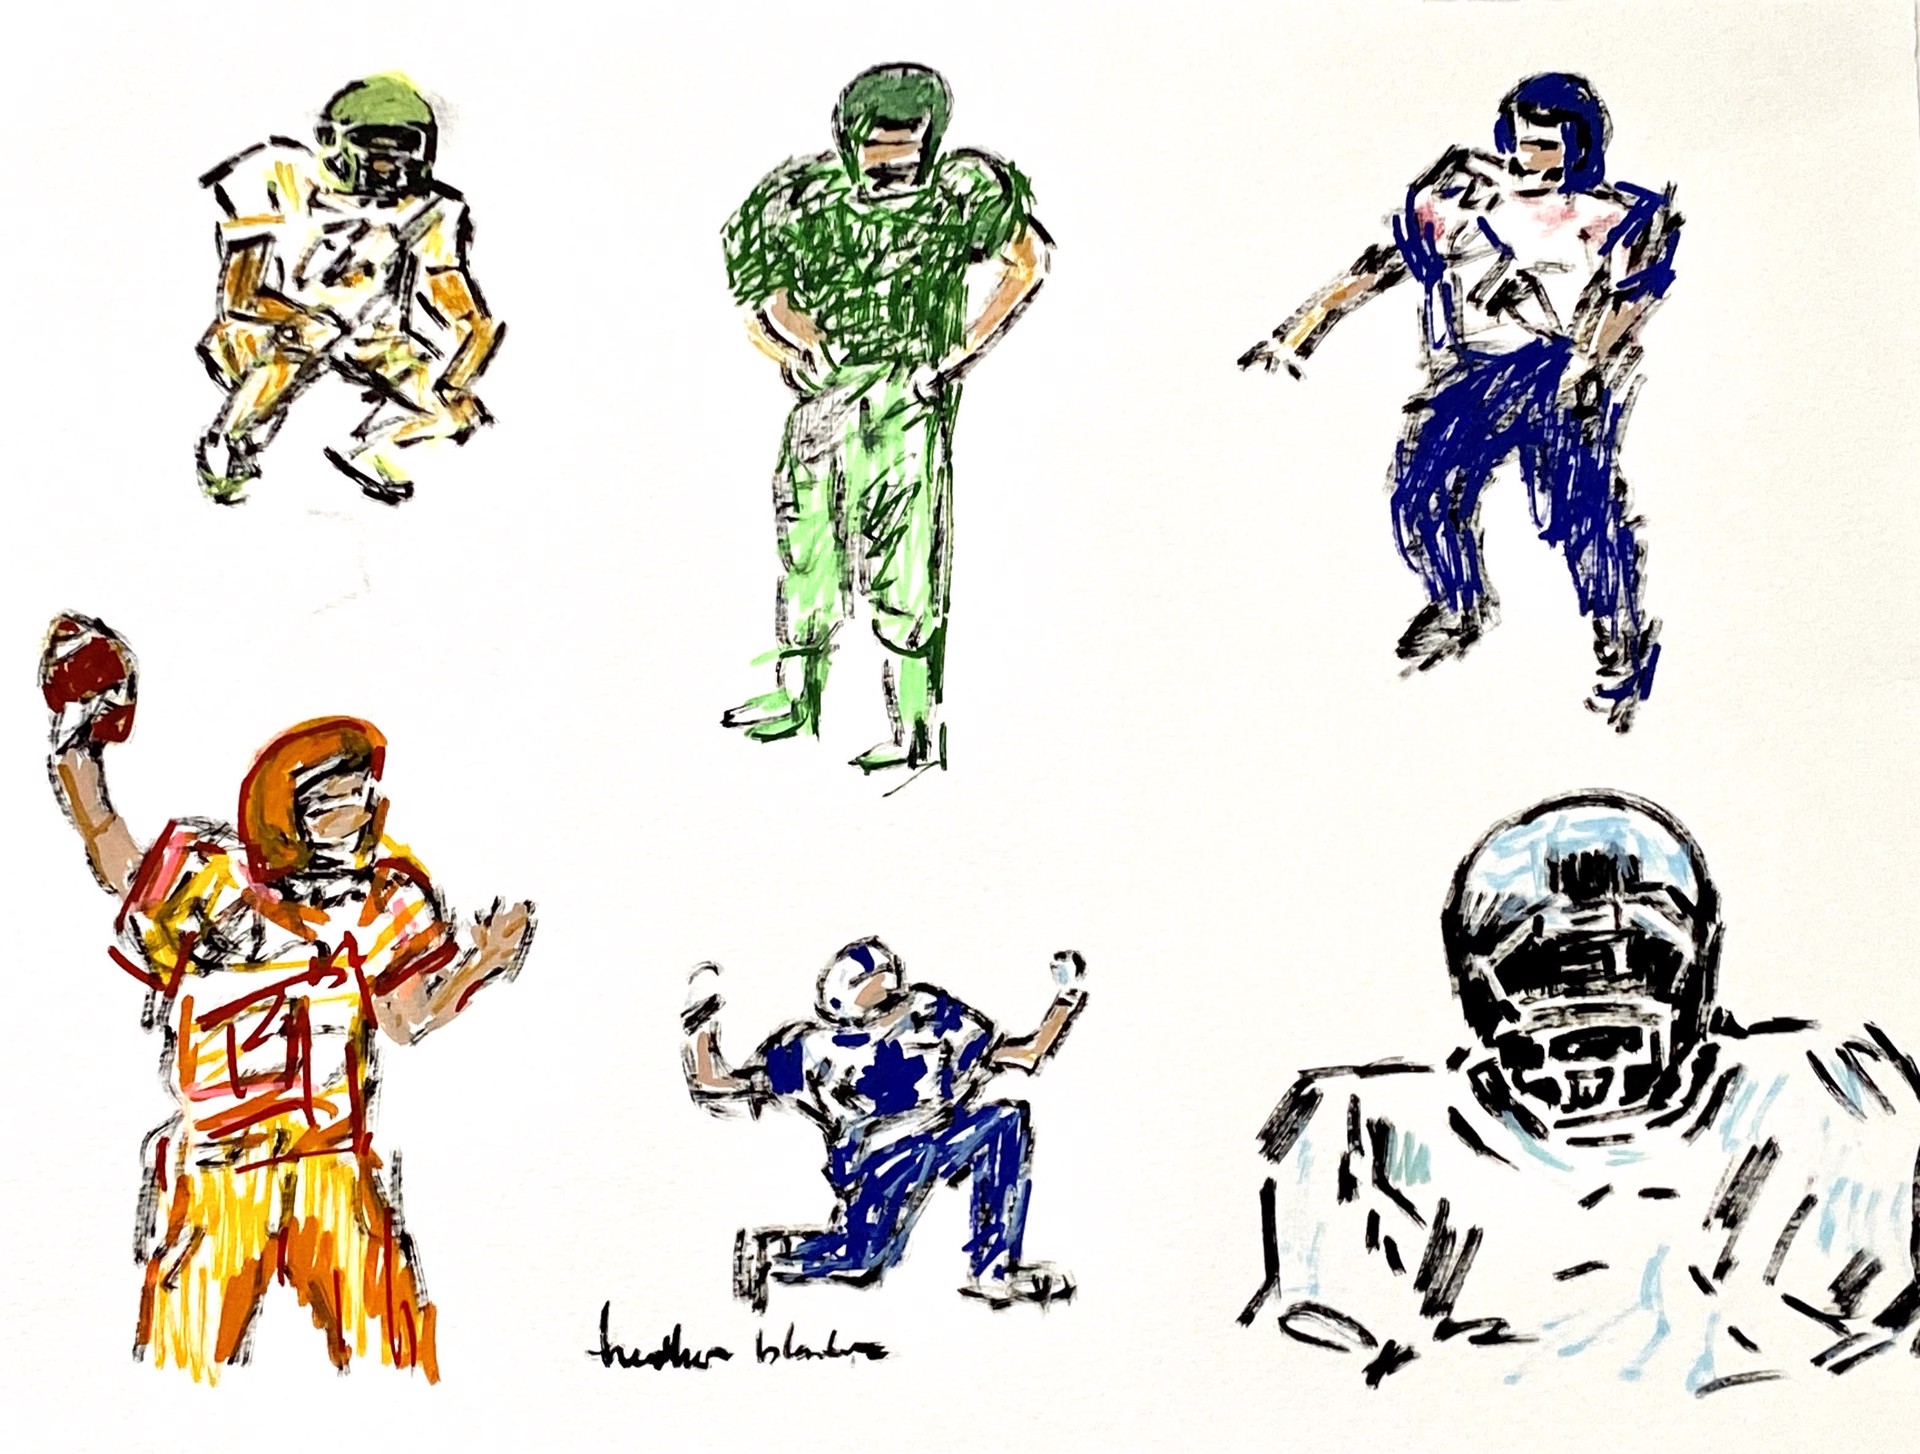 Football commission / pair with #873 by Heather Blanton